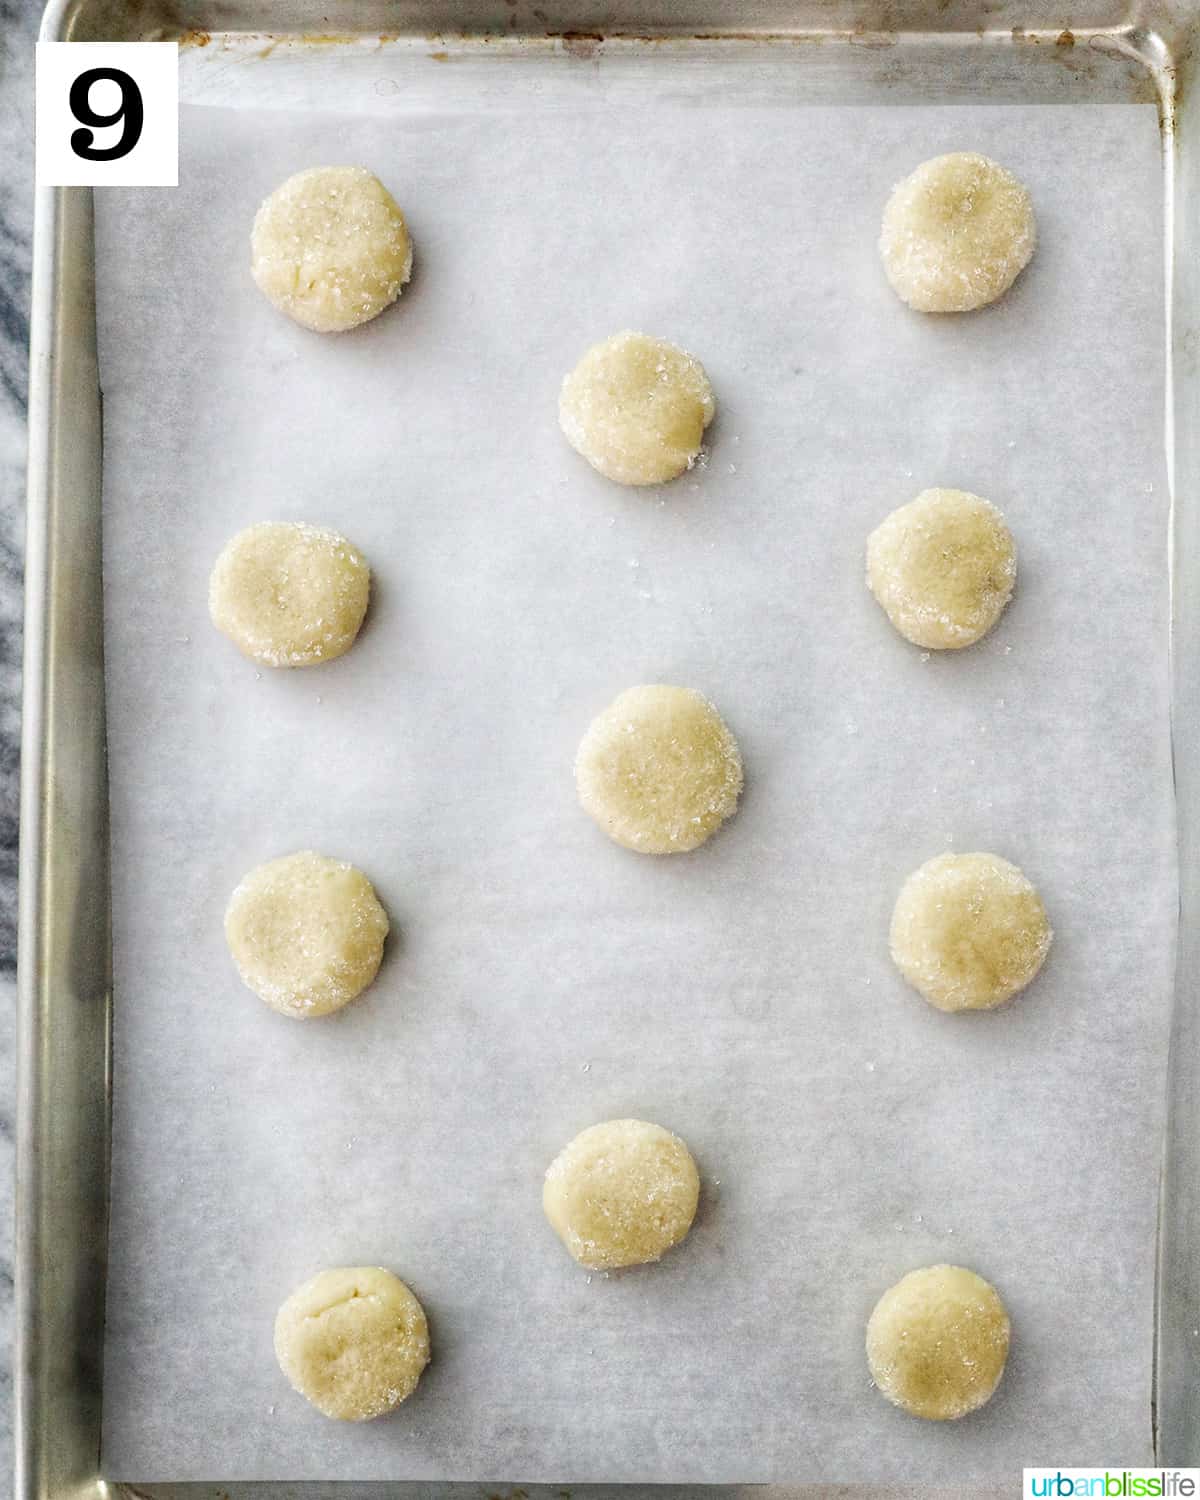 several rows of round almond sugar cookie dough balls on parchment paper on a baking sheet.